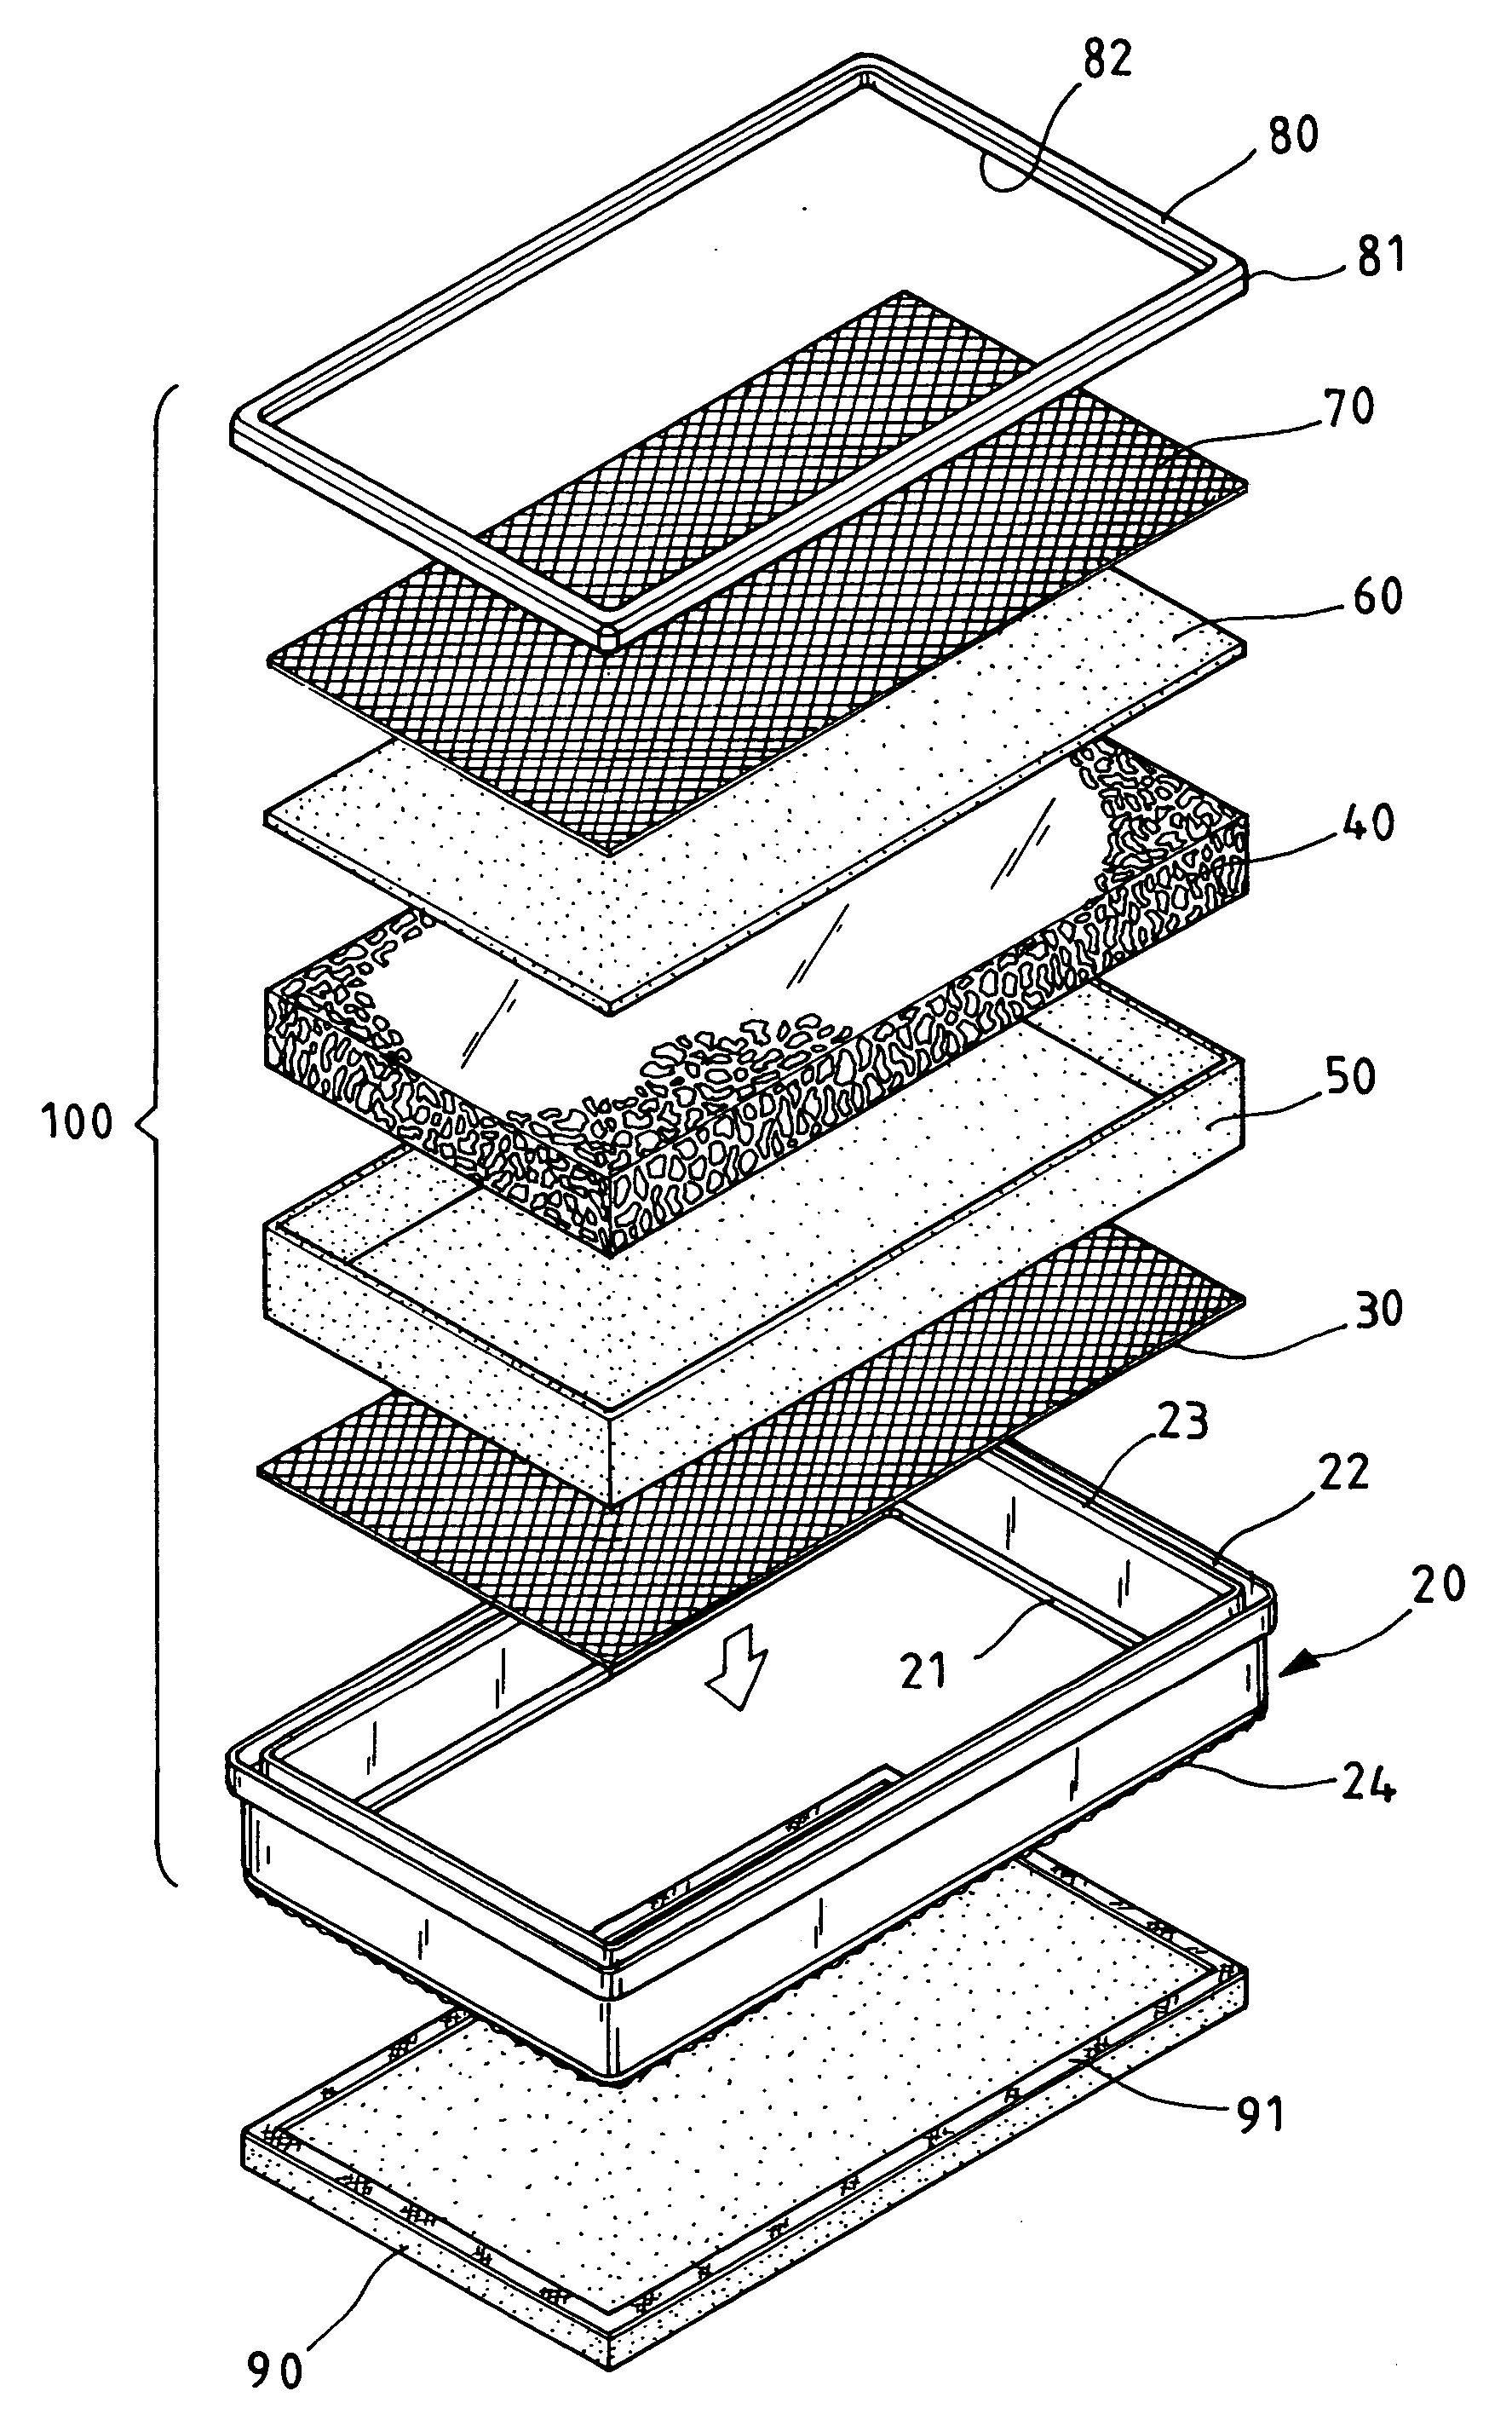 Apparatus with nano-sized platinum black and oxygen-rich ceramic powder for filtering the incoming air into an internal combustion engine